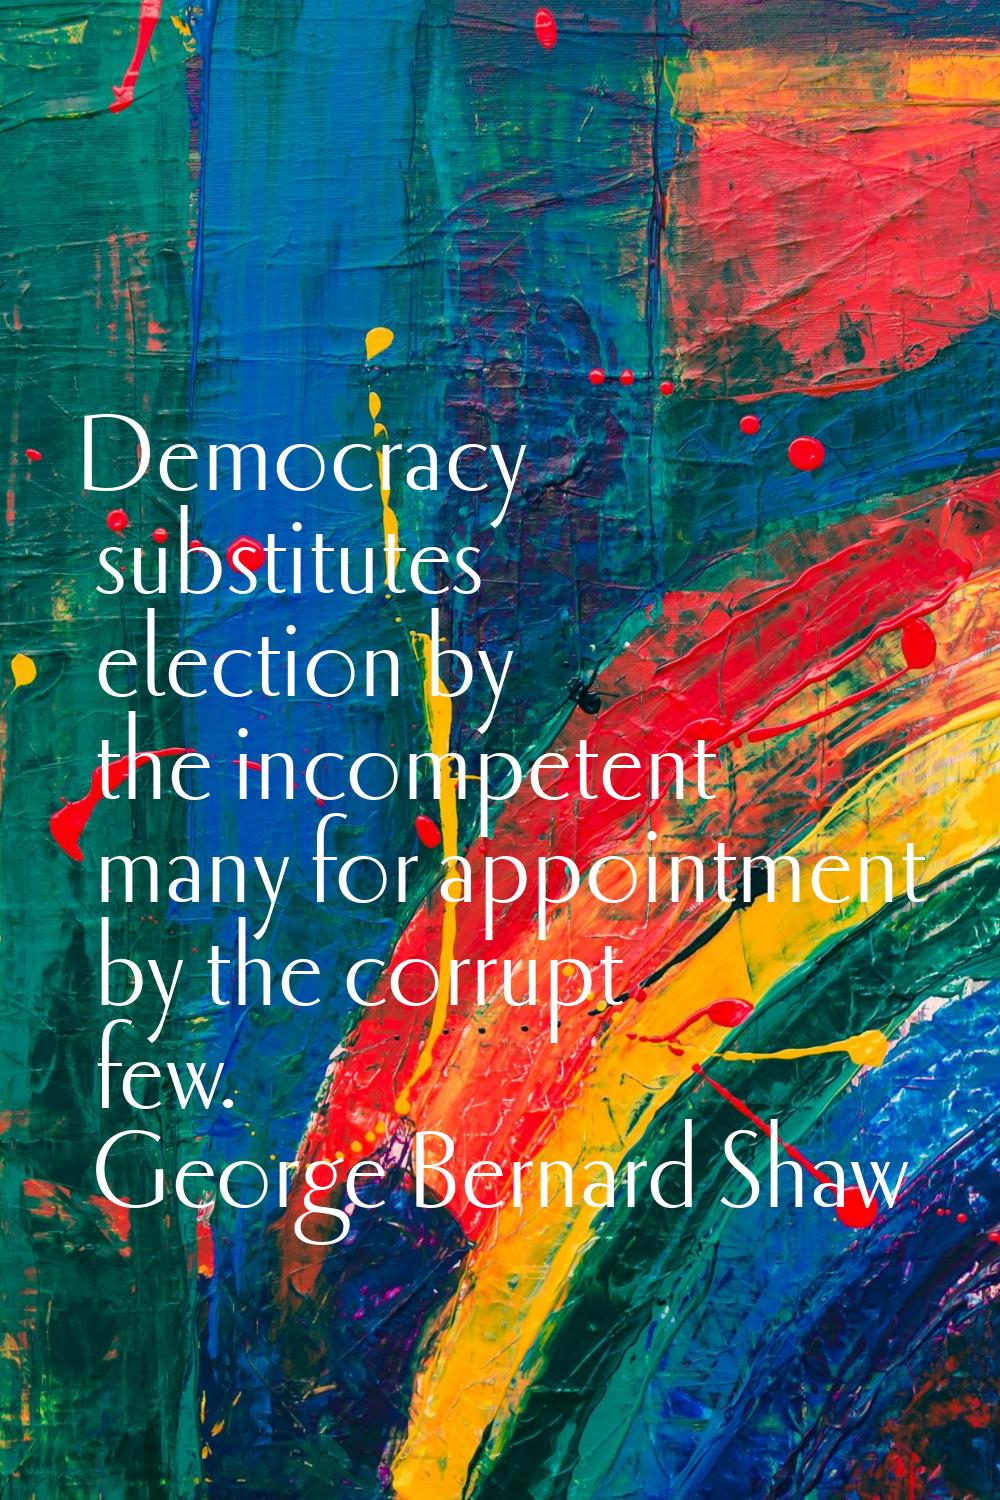 Democracy substitutes election by the incompetent many for appointment by the corrupt few.